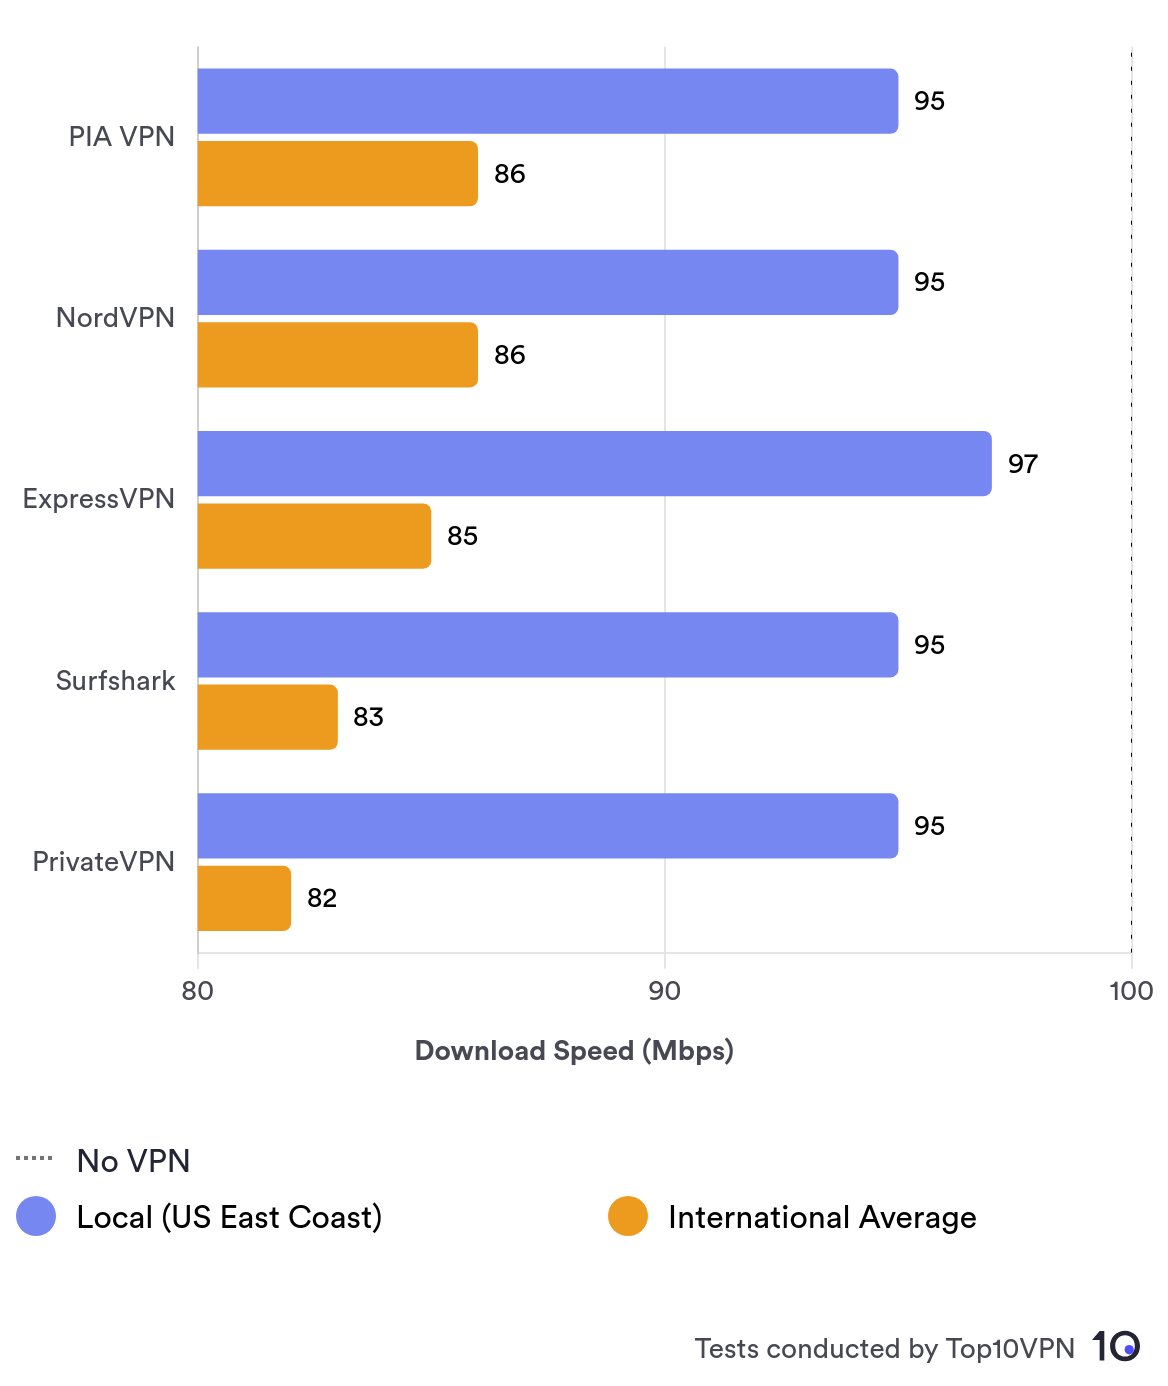 Private Internet Access compared with rivals NordVPN, ExpressVPN, Surfshark, and PrivateVPN. It performs extremely well compared to them.